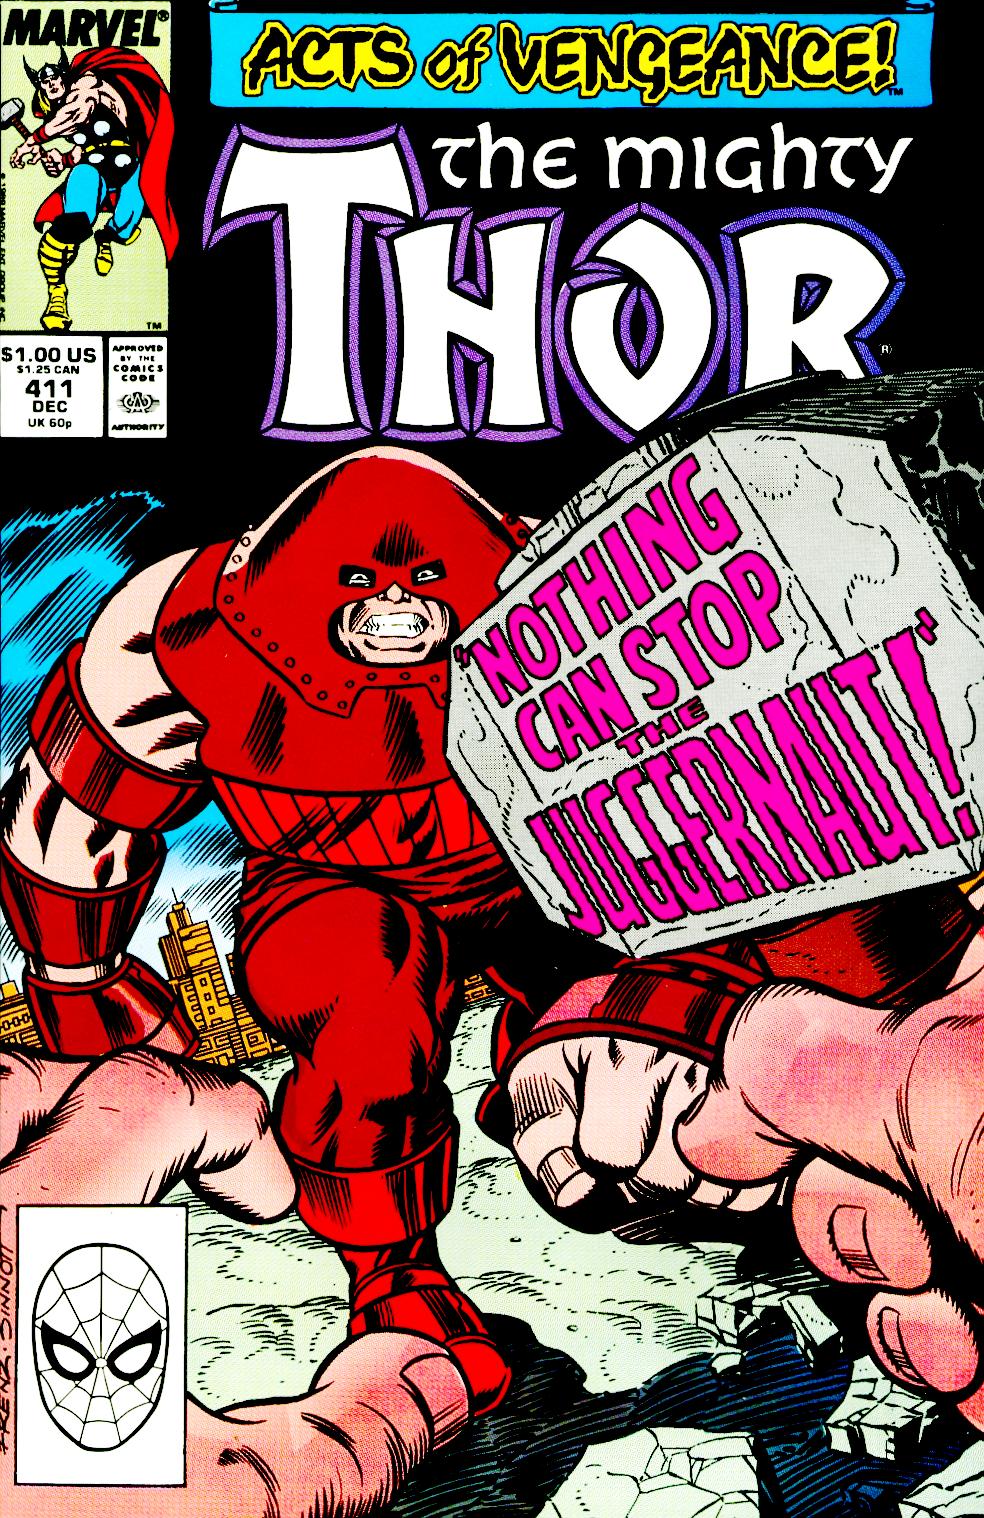 What would happen if Thor hit or threw Mjolnir at The Juggernaut